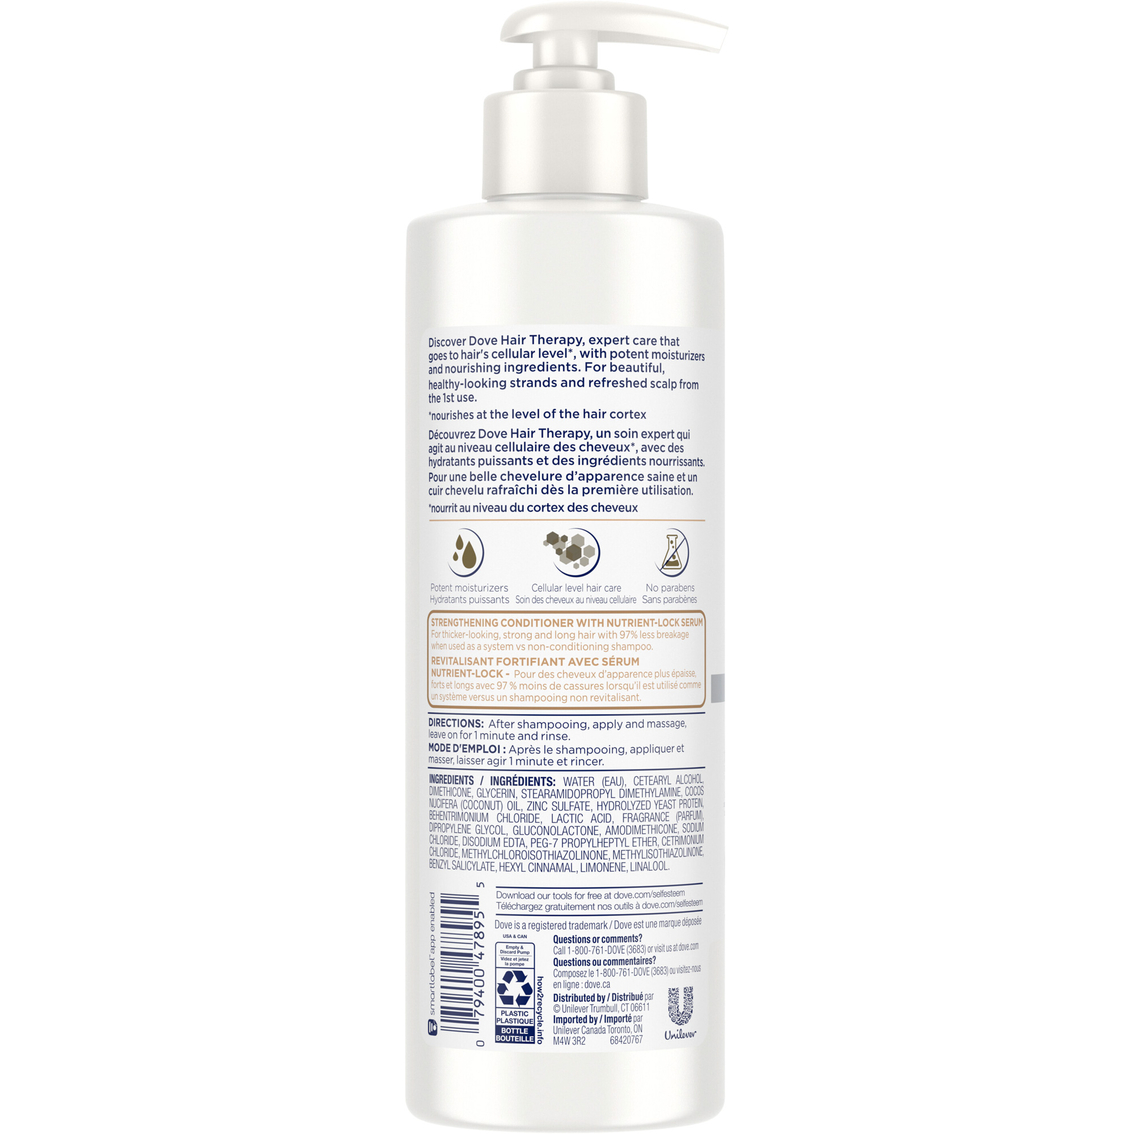 Dove Beauty Hair Therapy Breakage Remedy Conditioner, 13.5 oz. - Image 2 of 2